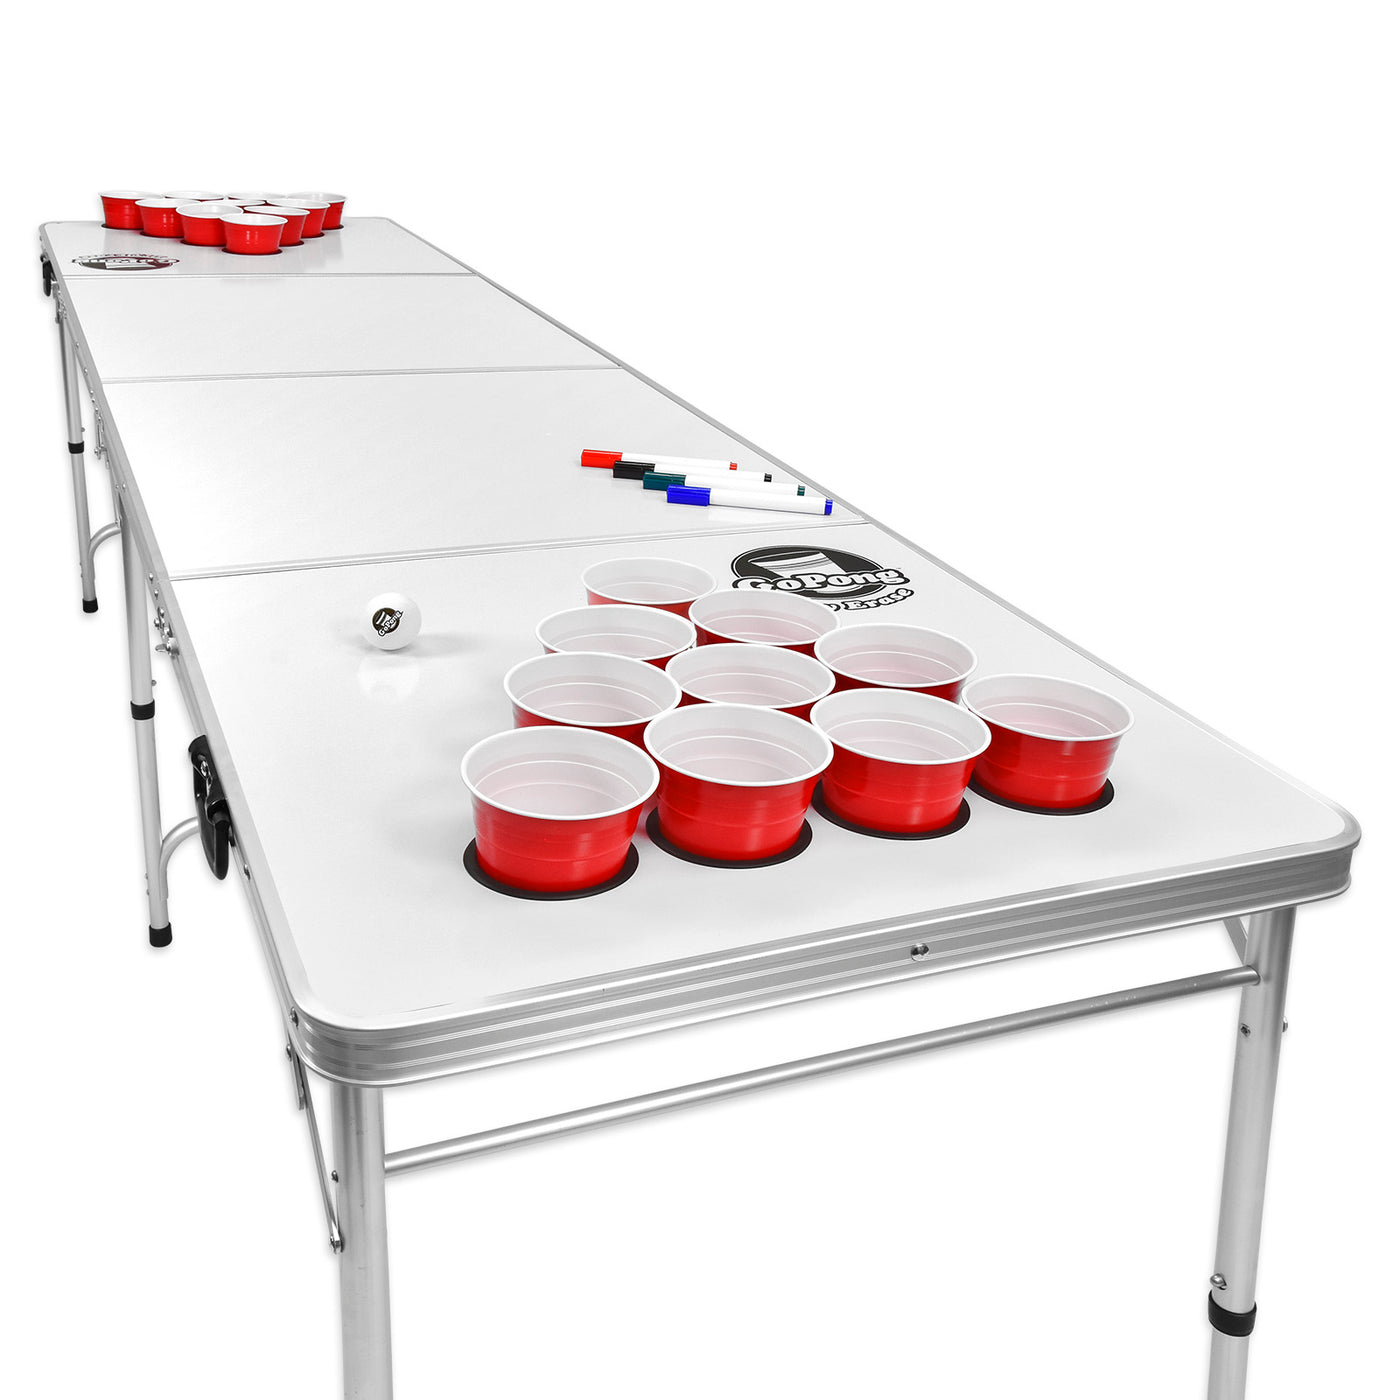 OFFICIAL SIZE 8 FOOT FOLDING BEER PONG TABLE + FREE BEER PONG KIT